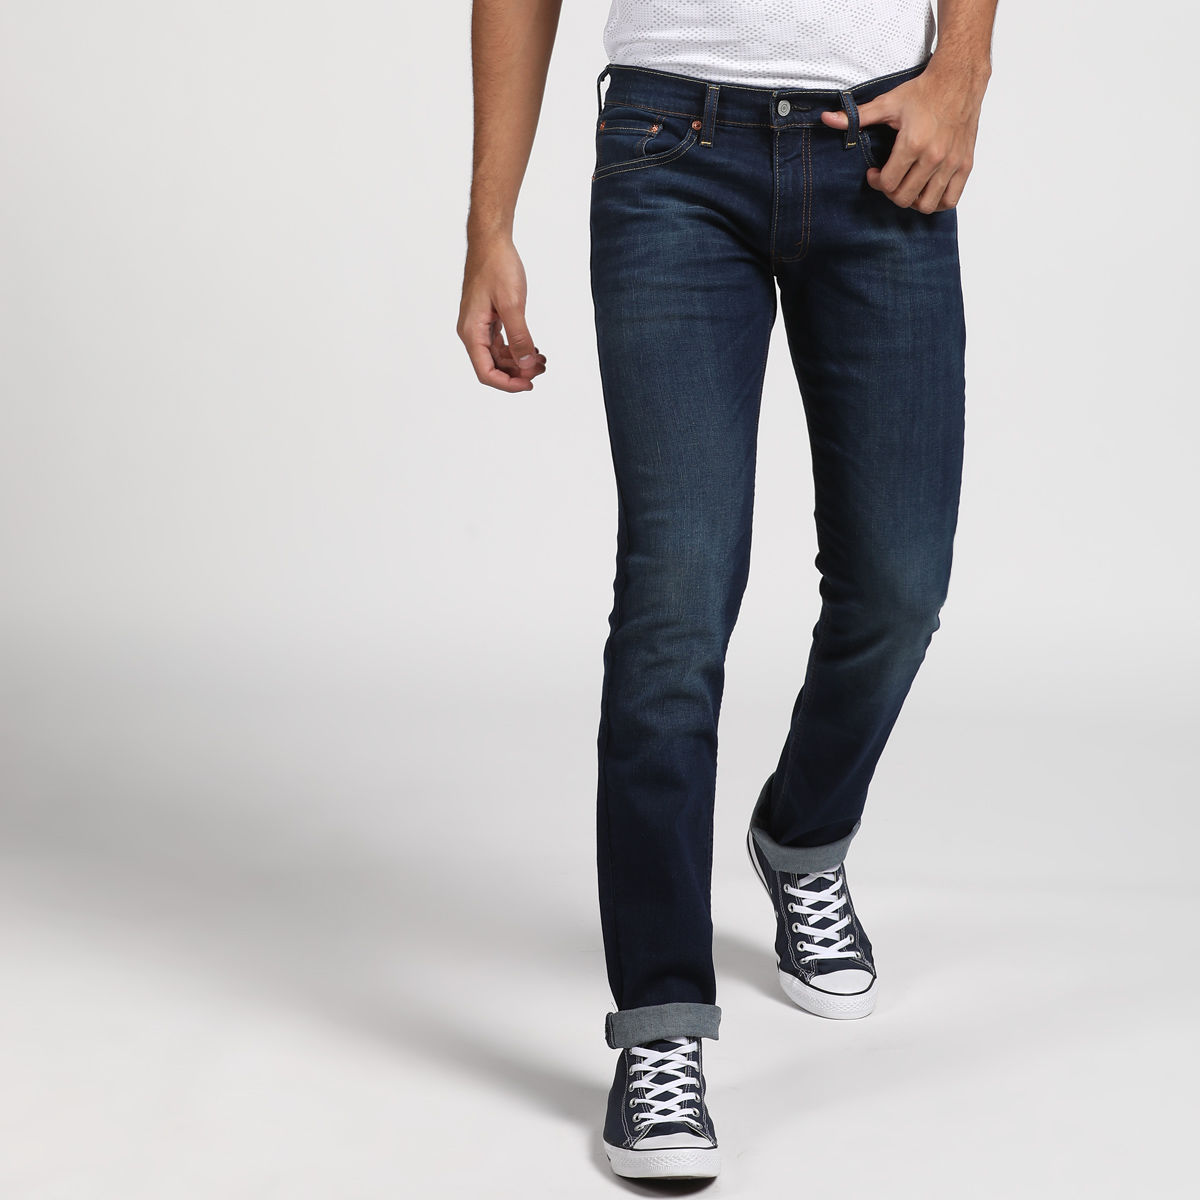 Buy Levi's SKINNY FIT JEANS at ₹  2499